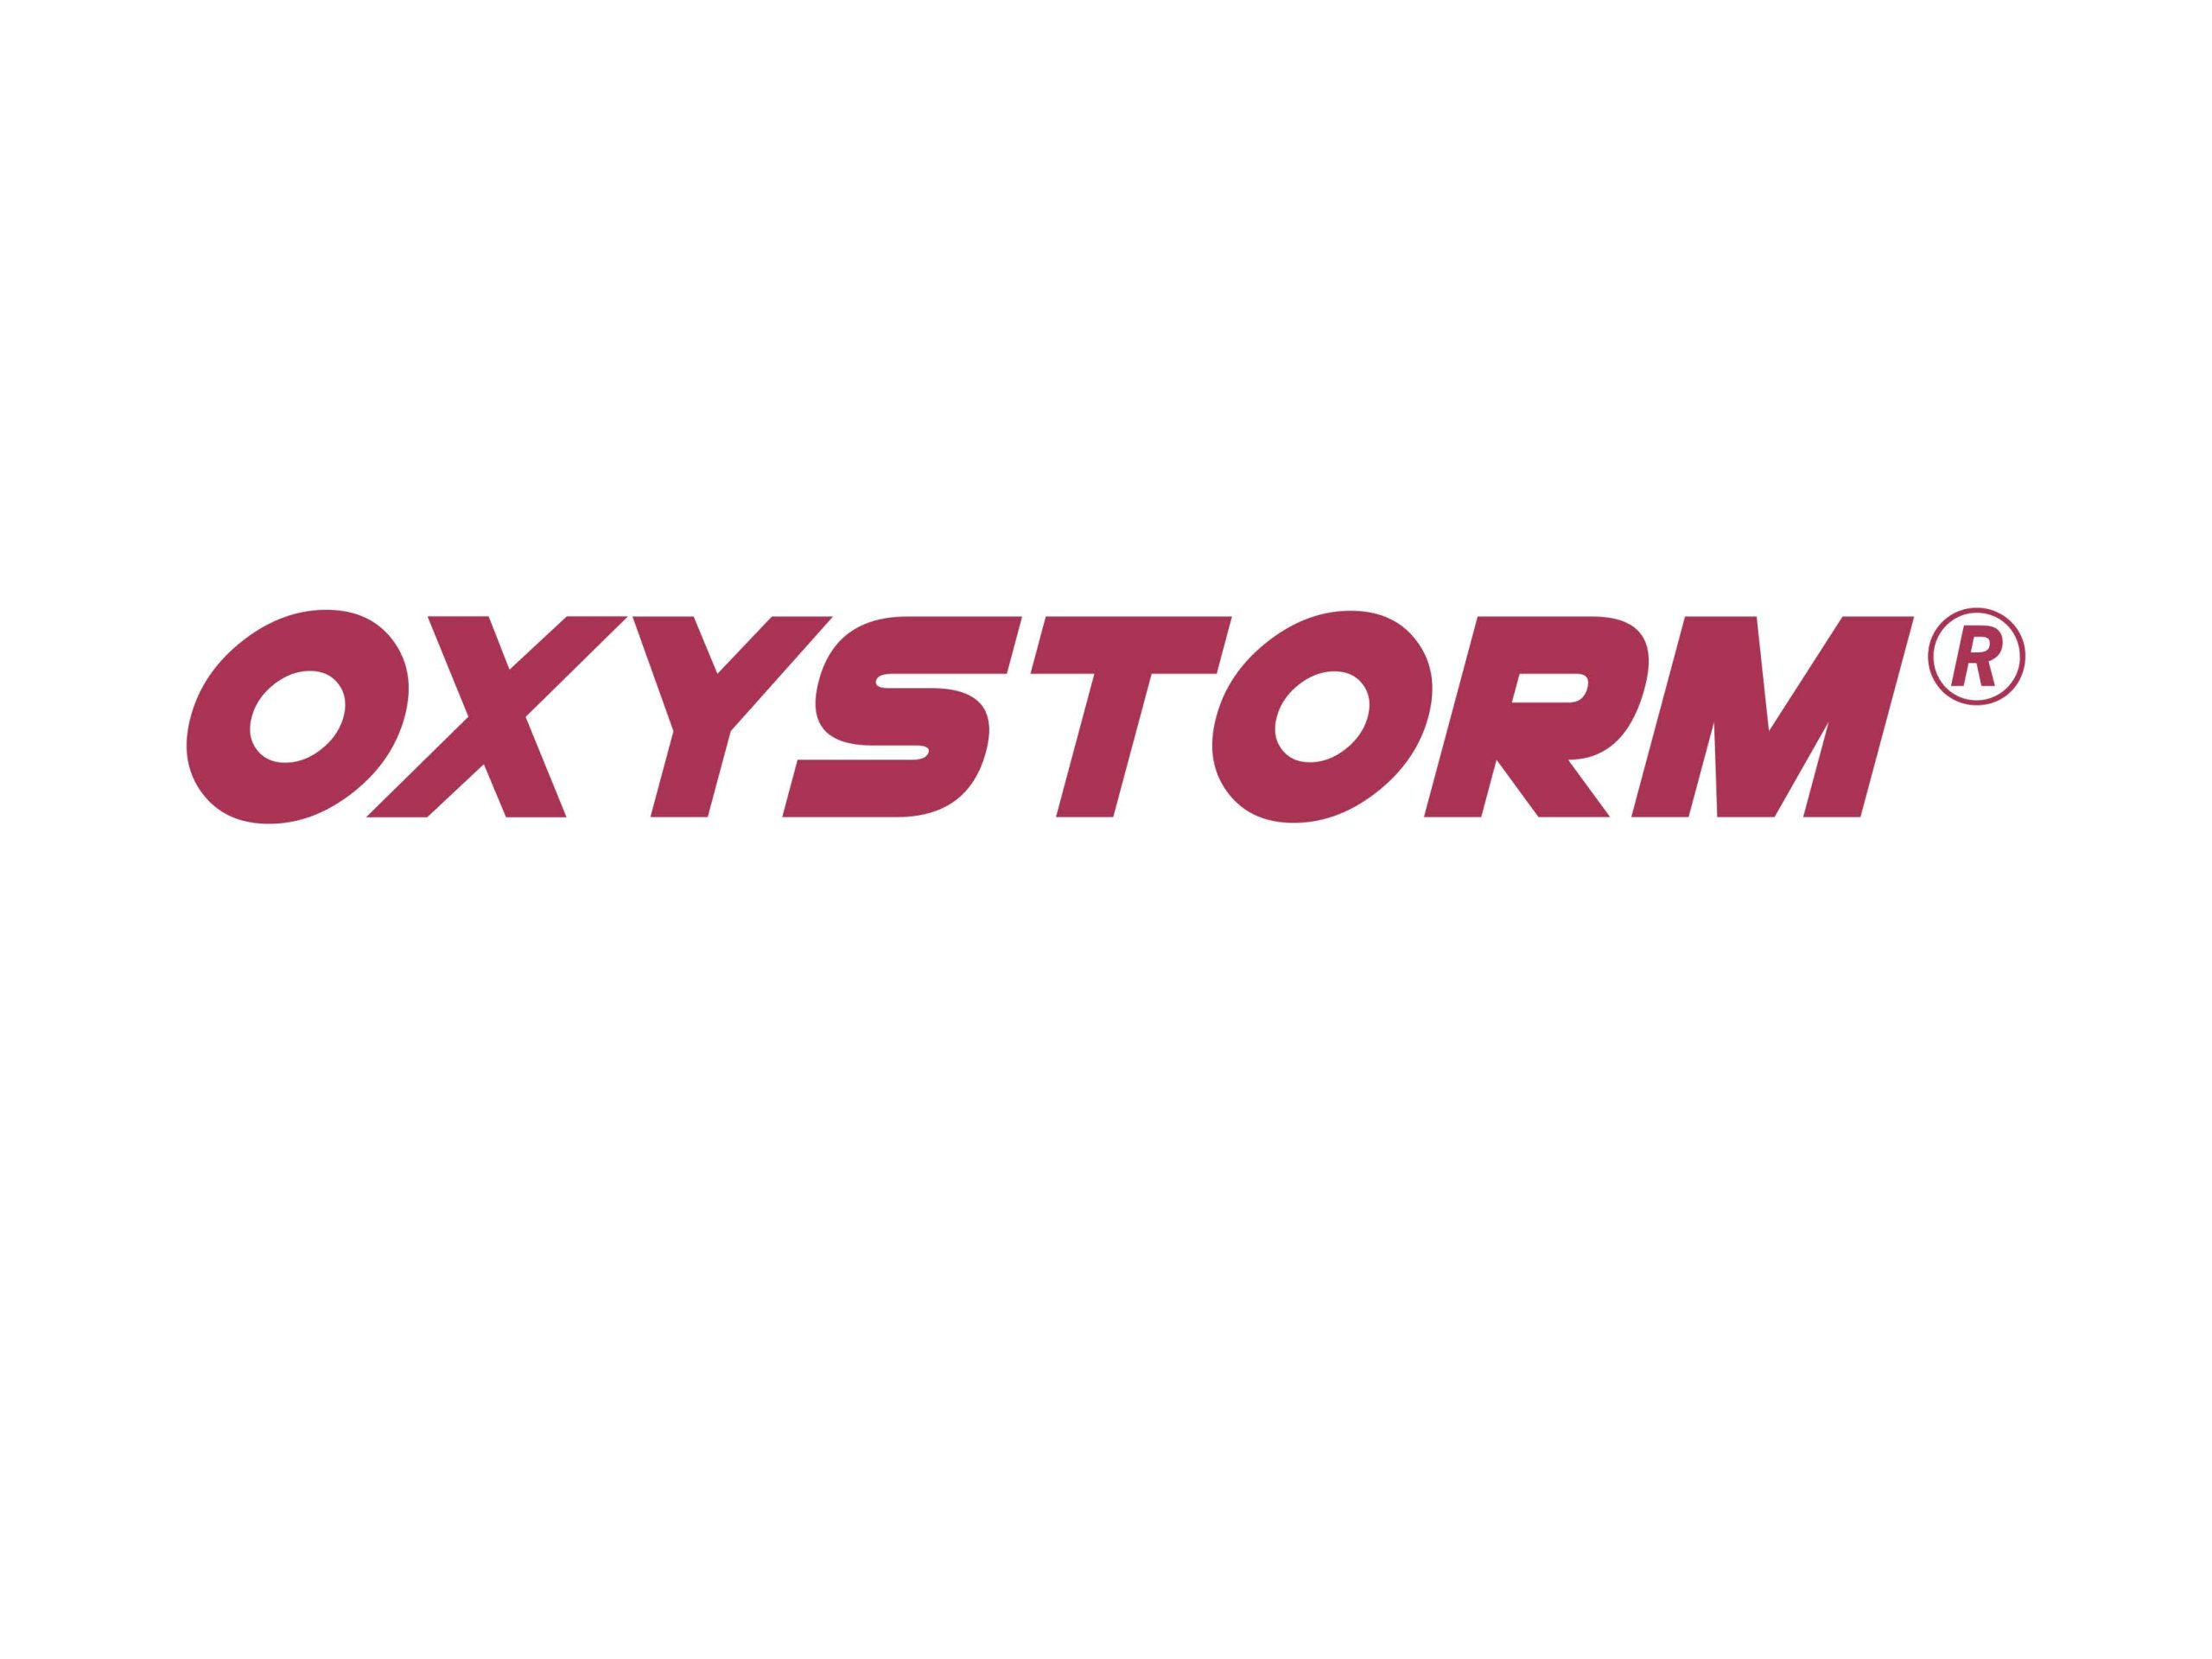 Oxystorm